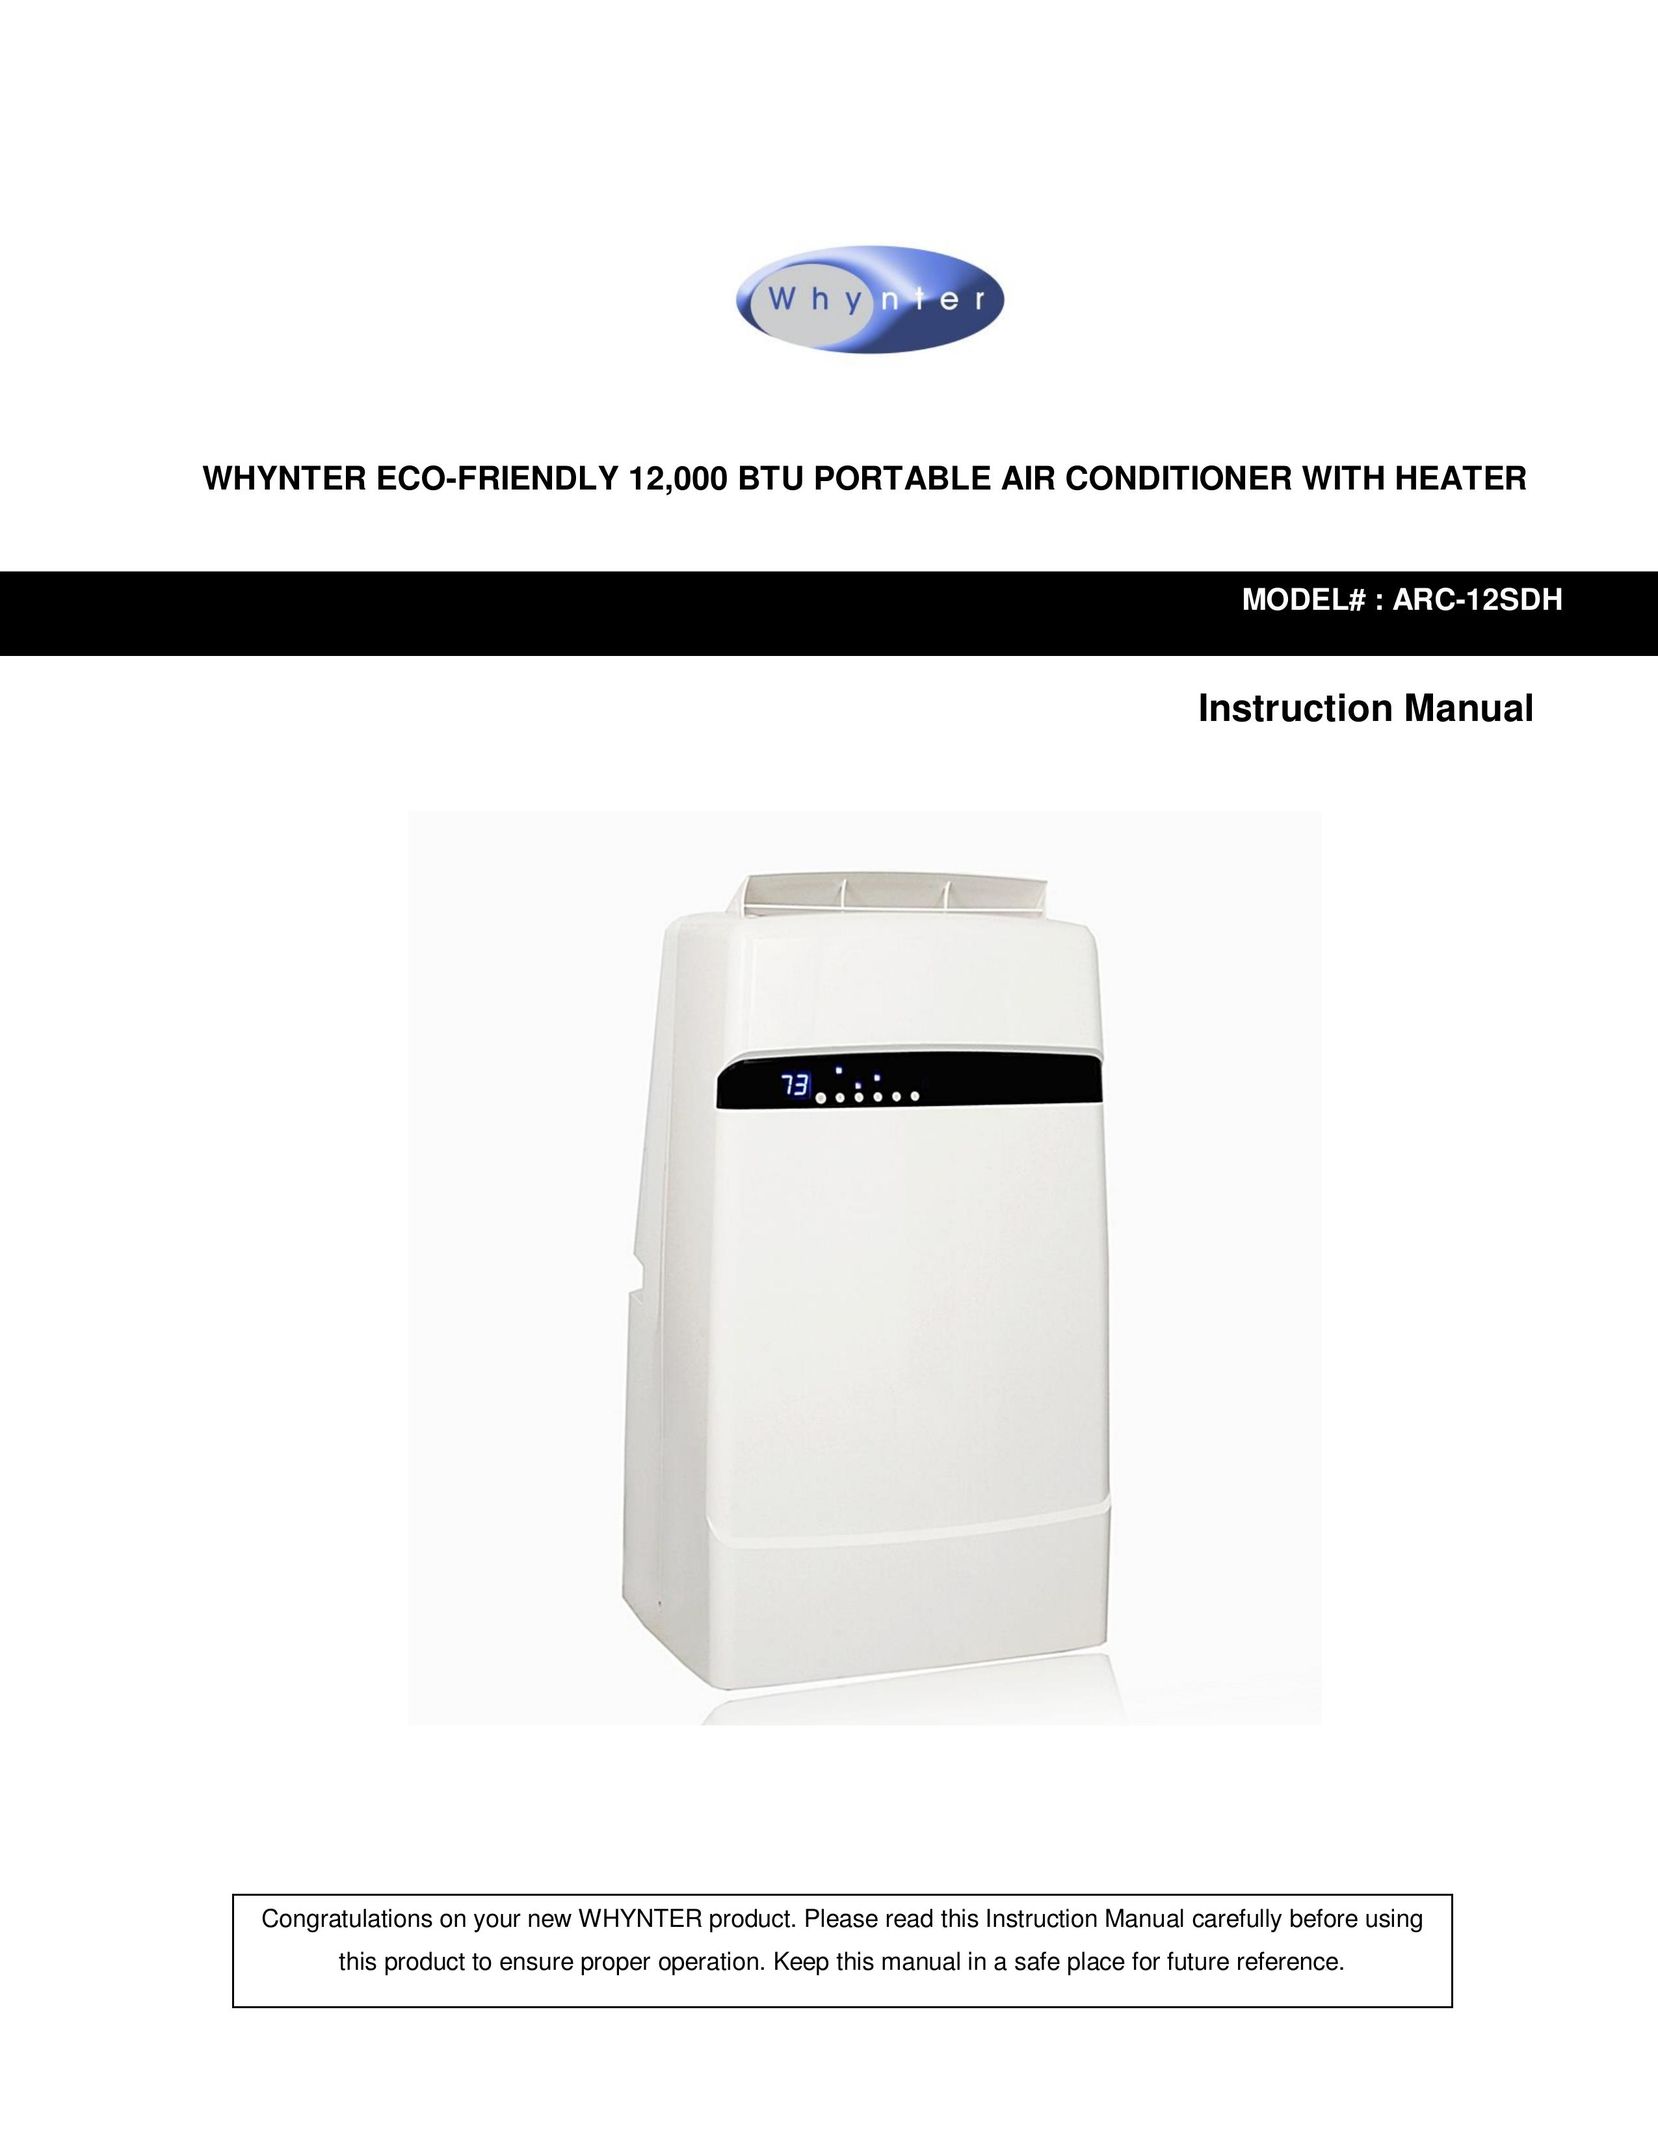 Whynter ARC-12SDH Air Conditioner User Manual